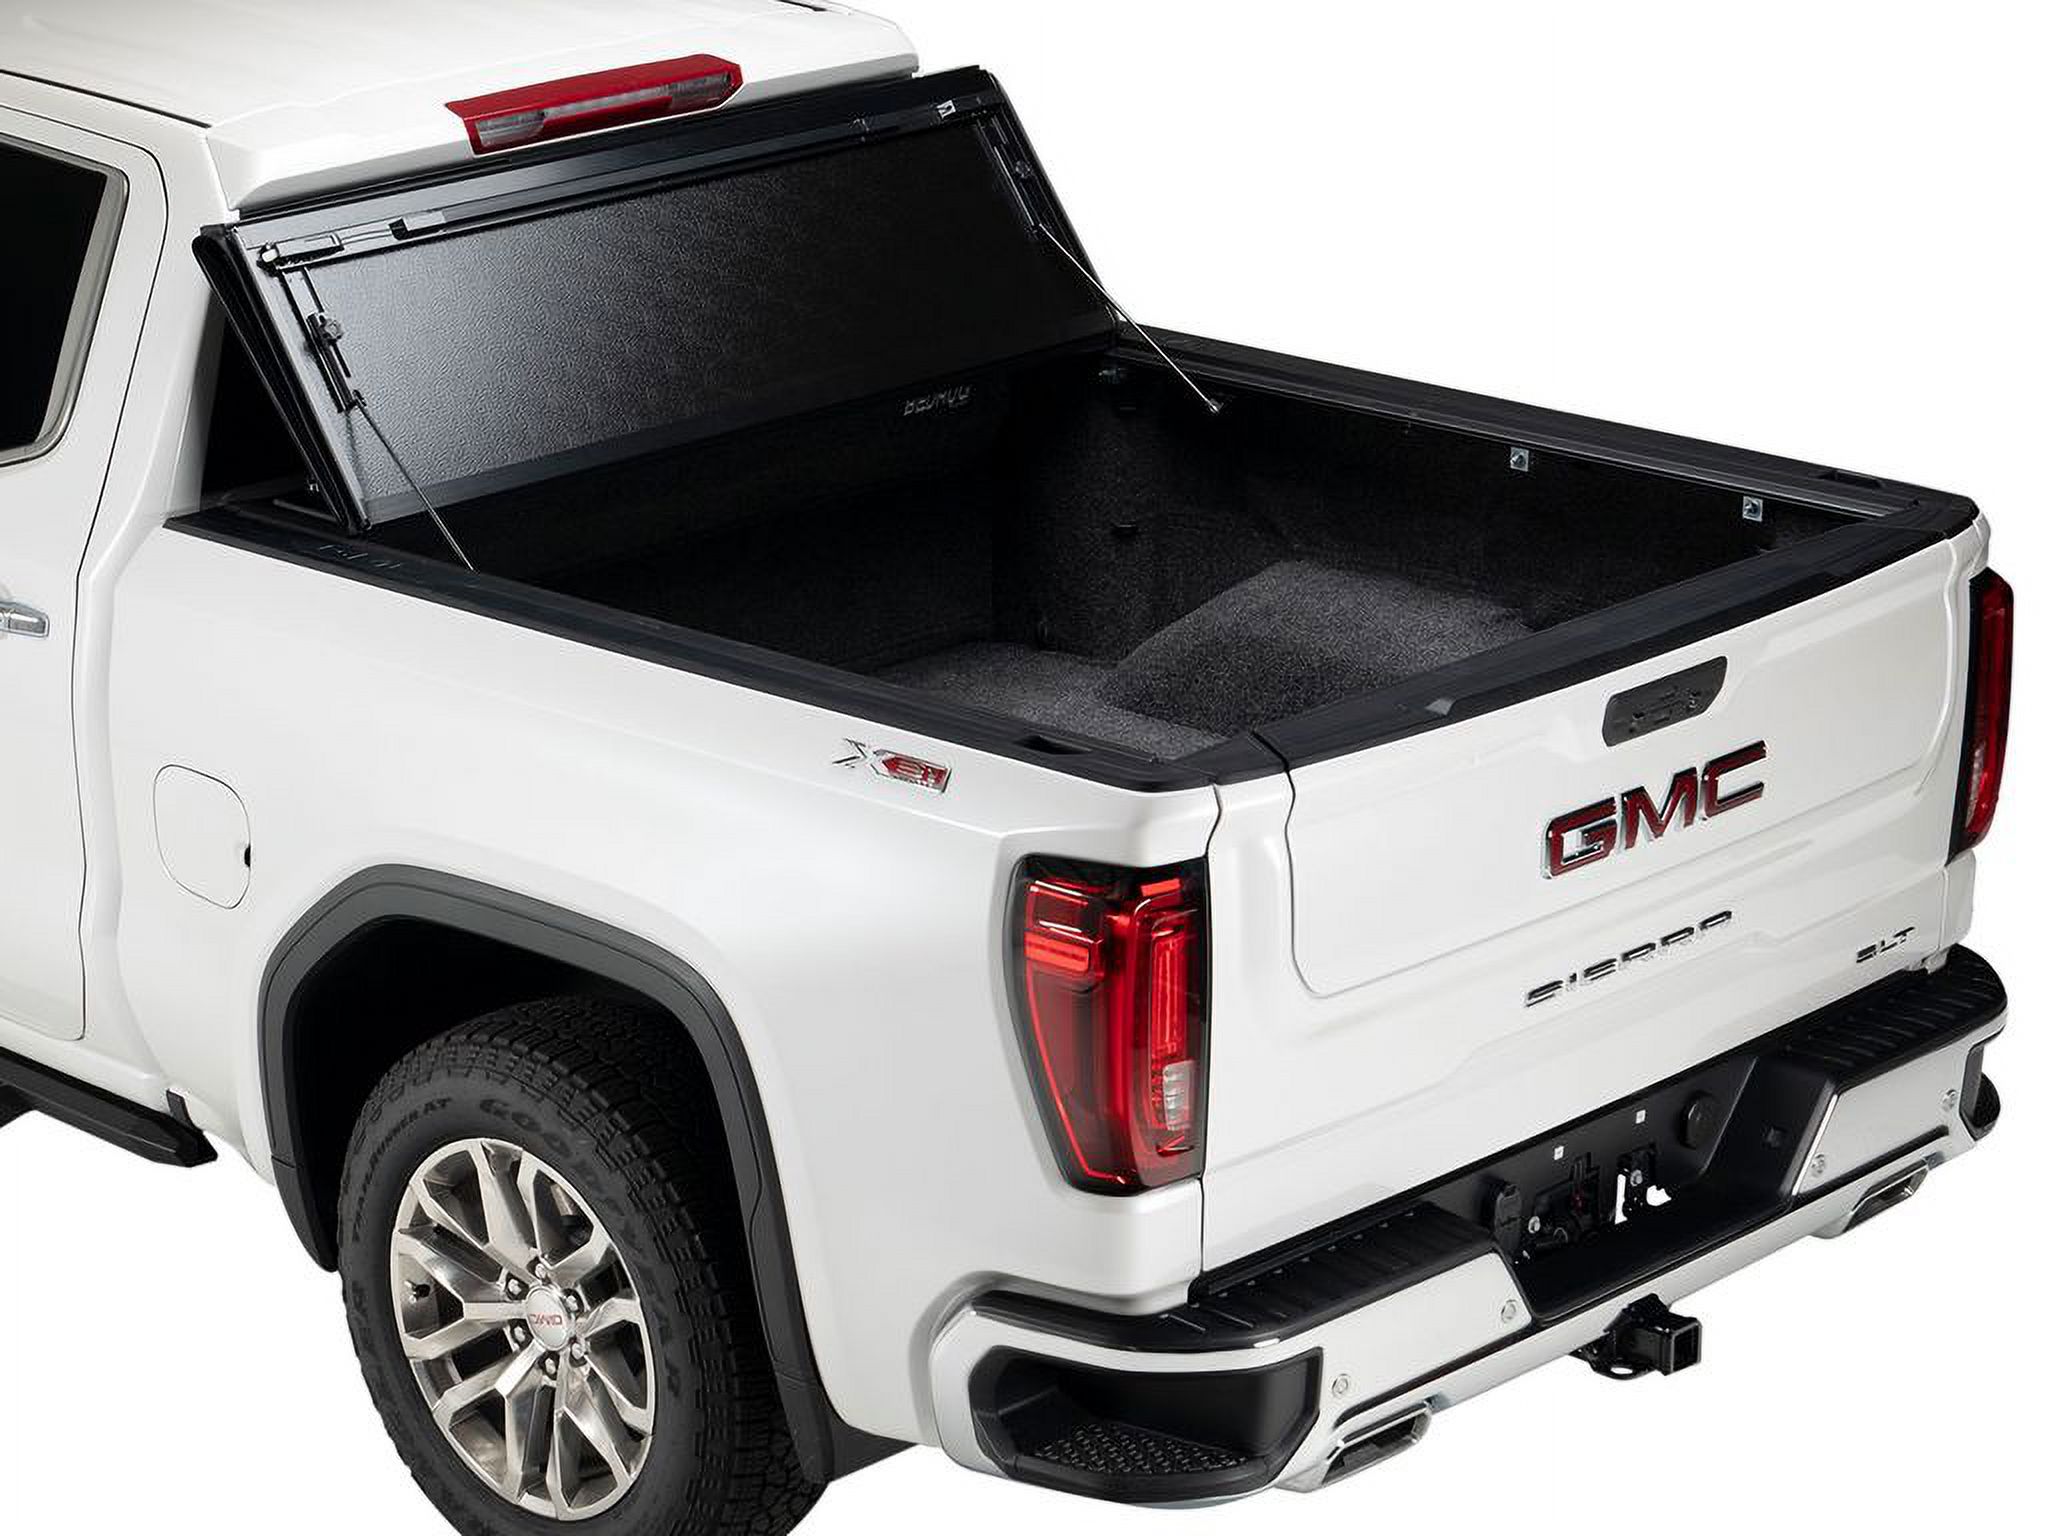 Gator by RealTruck FX Hard Folding Truck Bed Tonneau Cover | 8828409 | Compatible with 2007-2021 Toyota Tundra w/o Track System, Will Not Work With Trail Edition Models 5' 1" Bed (60.5") - image 4 of 9